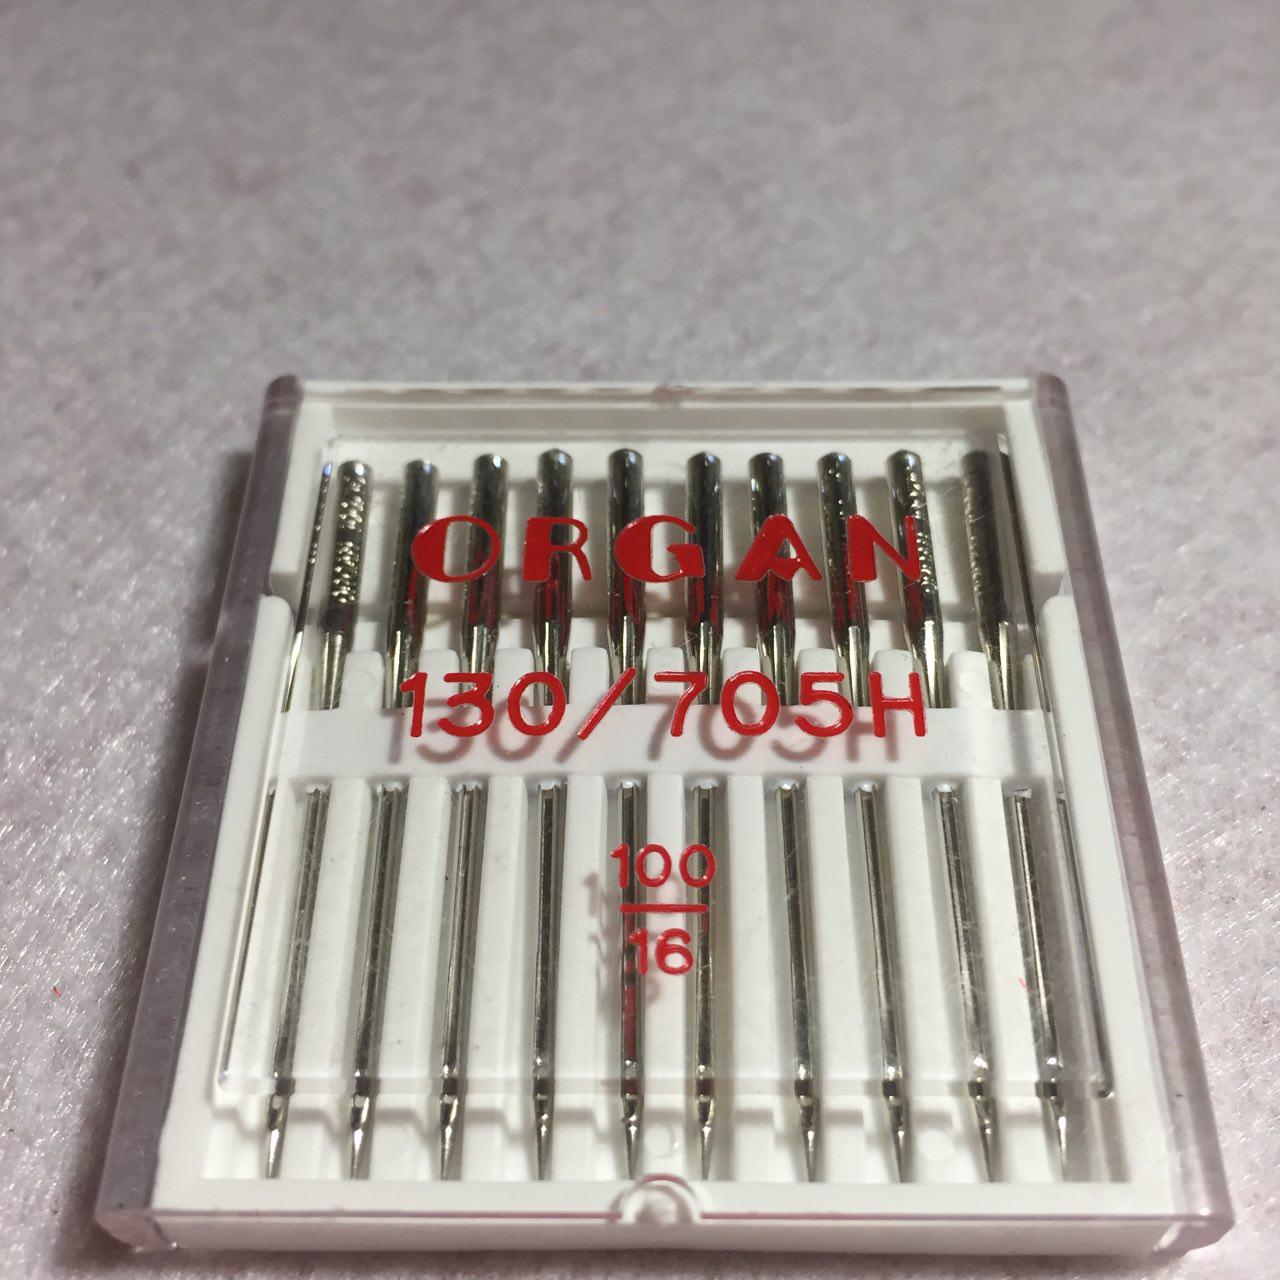 Needles for sewing, embroidery machines and overlocks